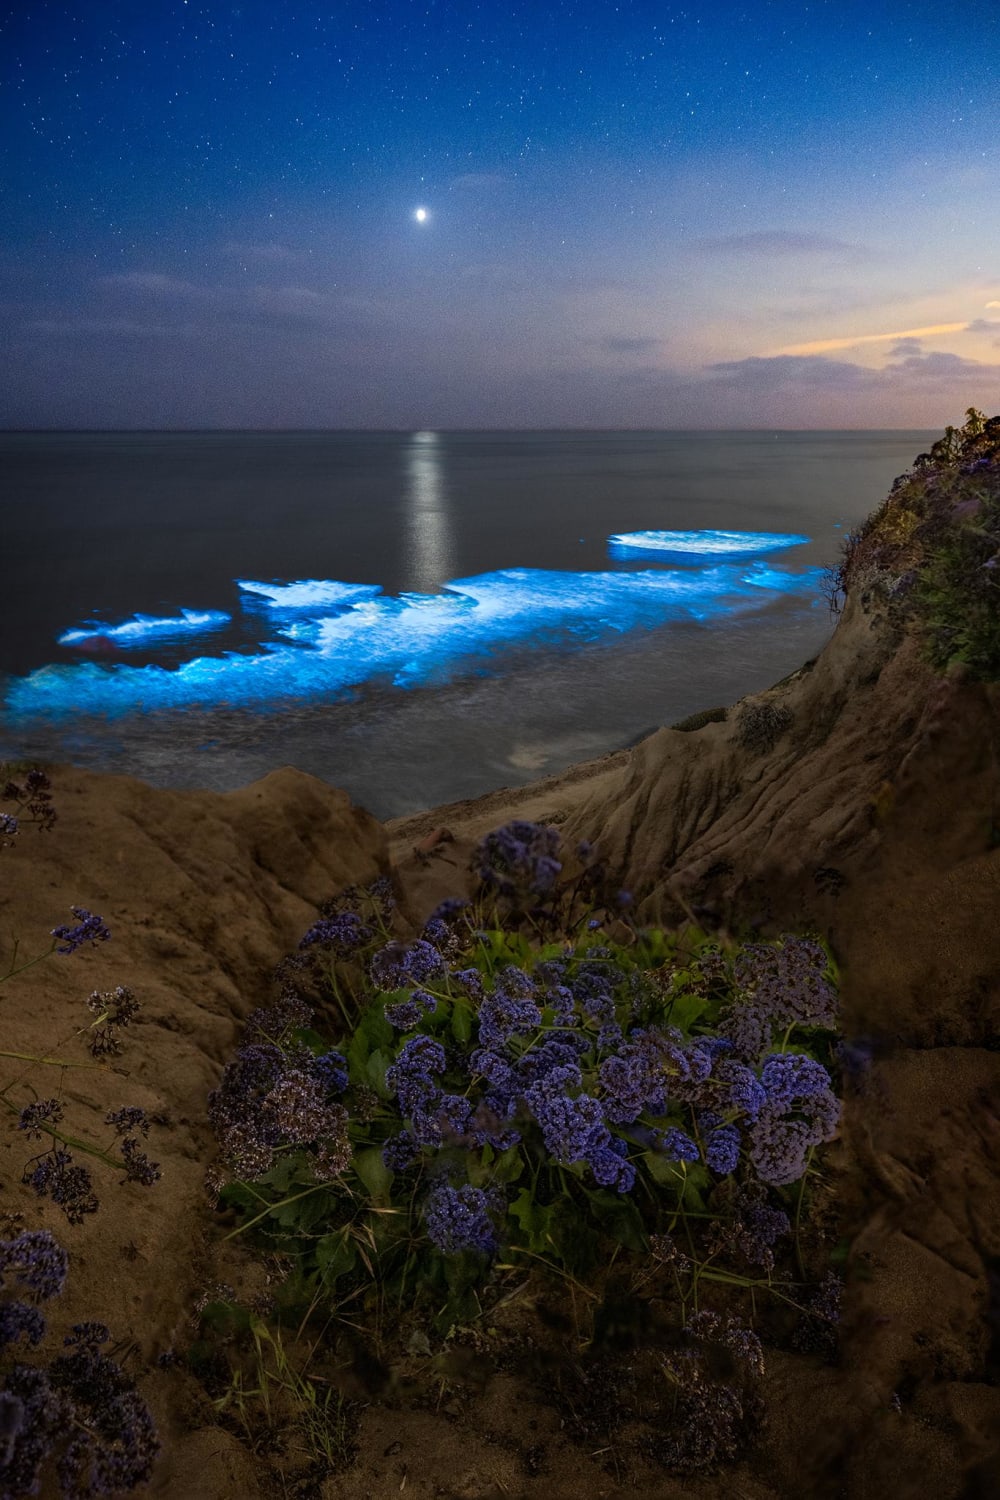 Bioluminescent waves glowing blue as Venus shines and reflects off the ocean - San Diego, CA @jackfusco